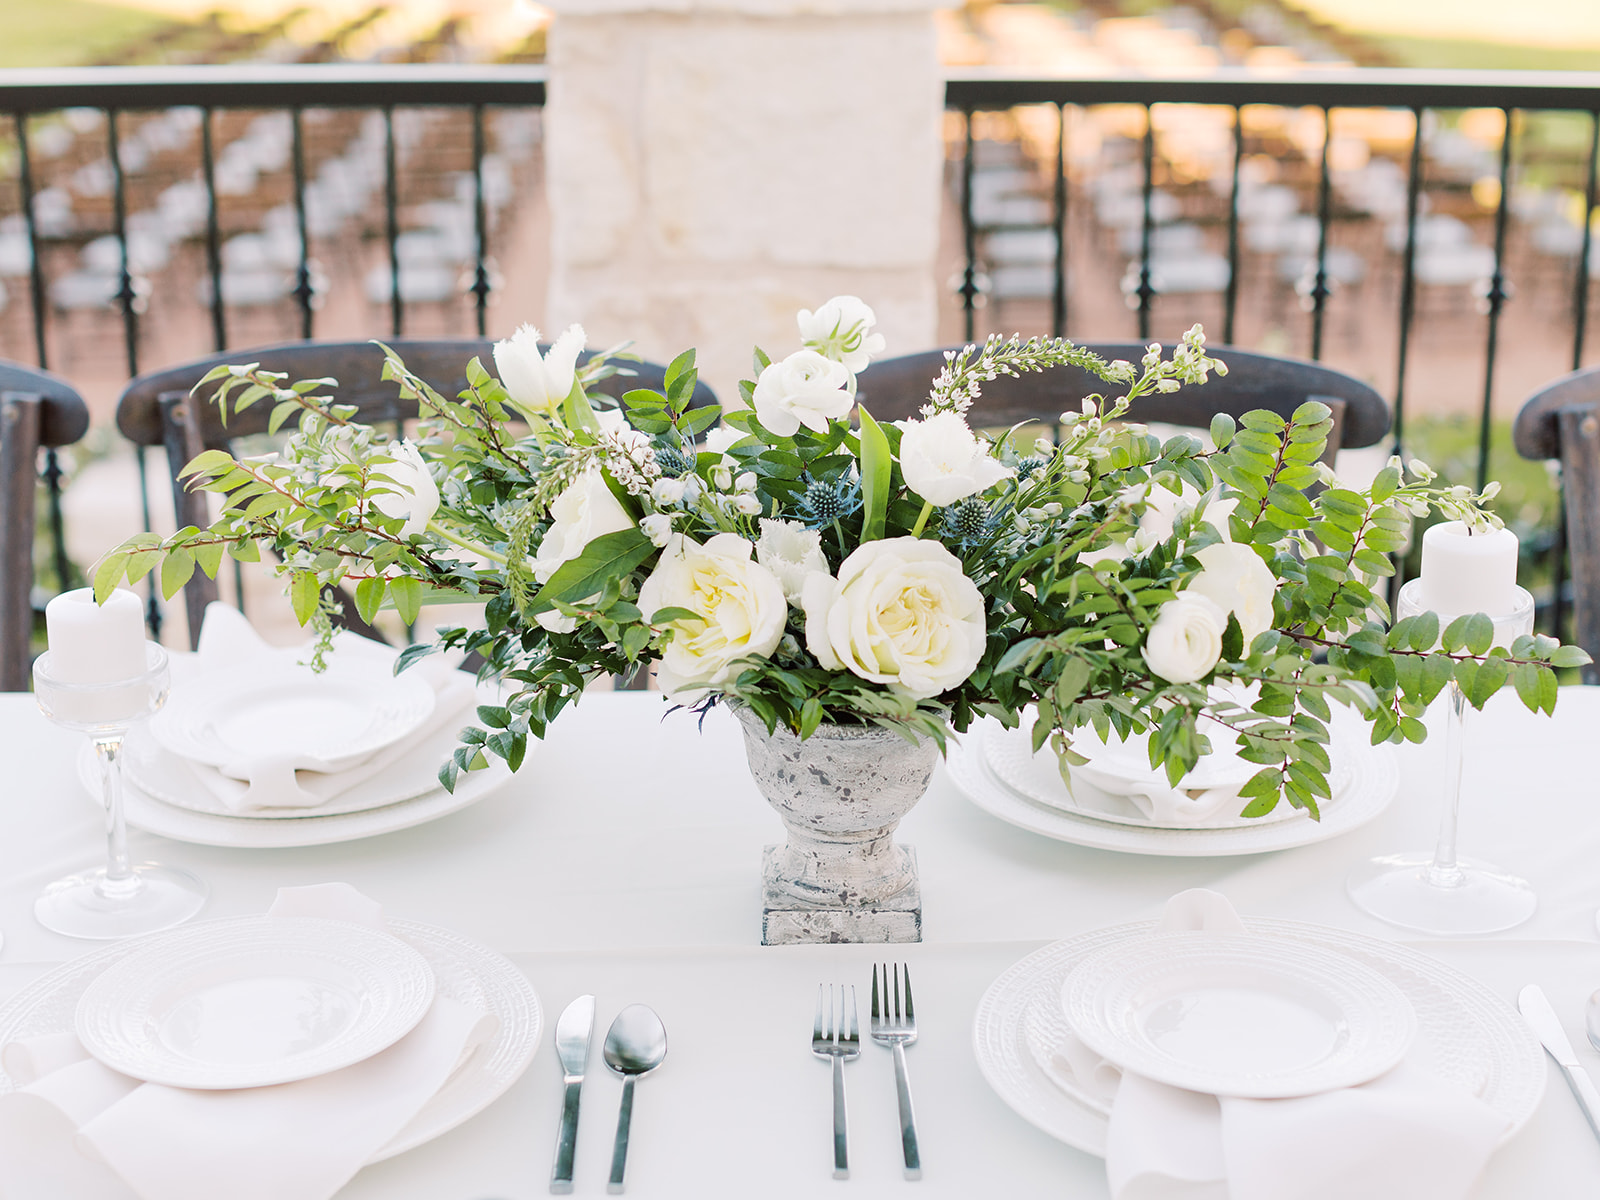 White and greenery wedding centerpiece: Elopement vineyard wedding at Umbra Winery by Alexa Kay Events. See more wedding ideas at alexakayevents.com!